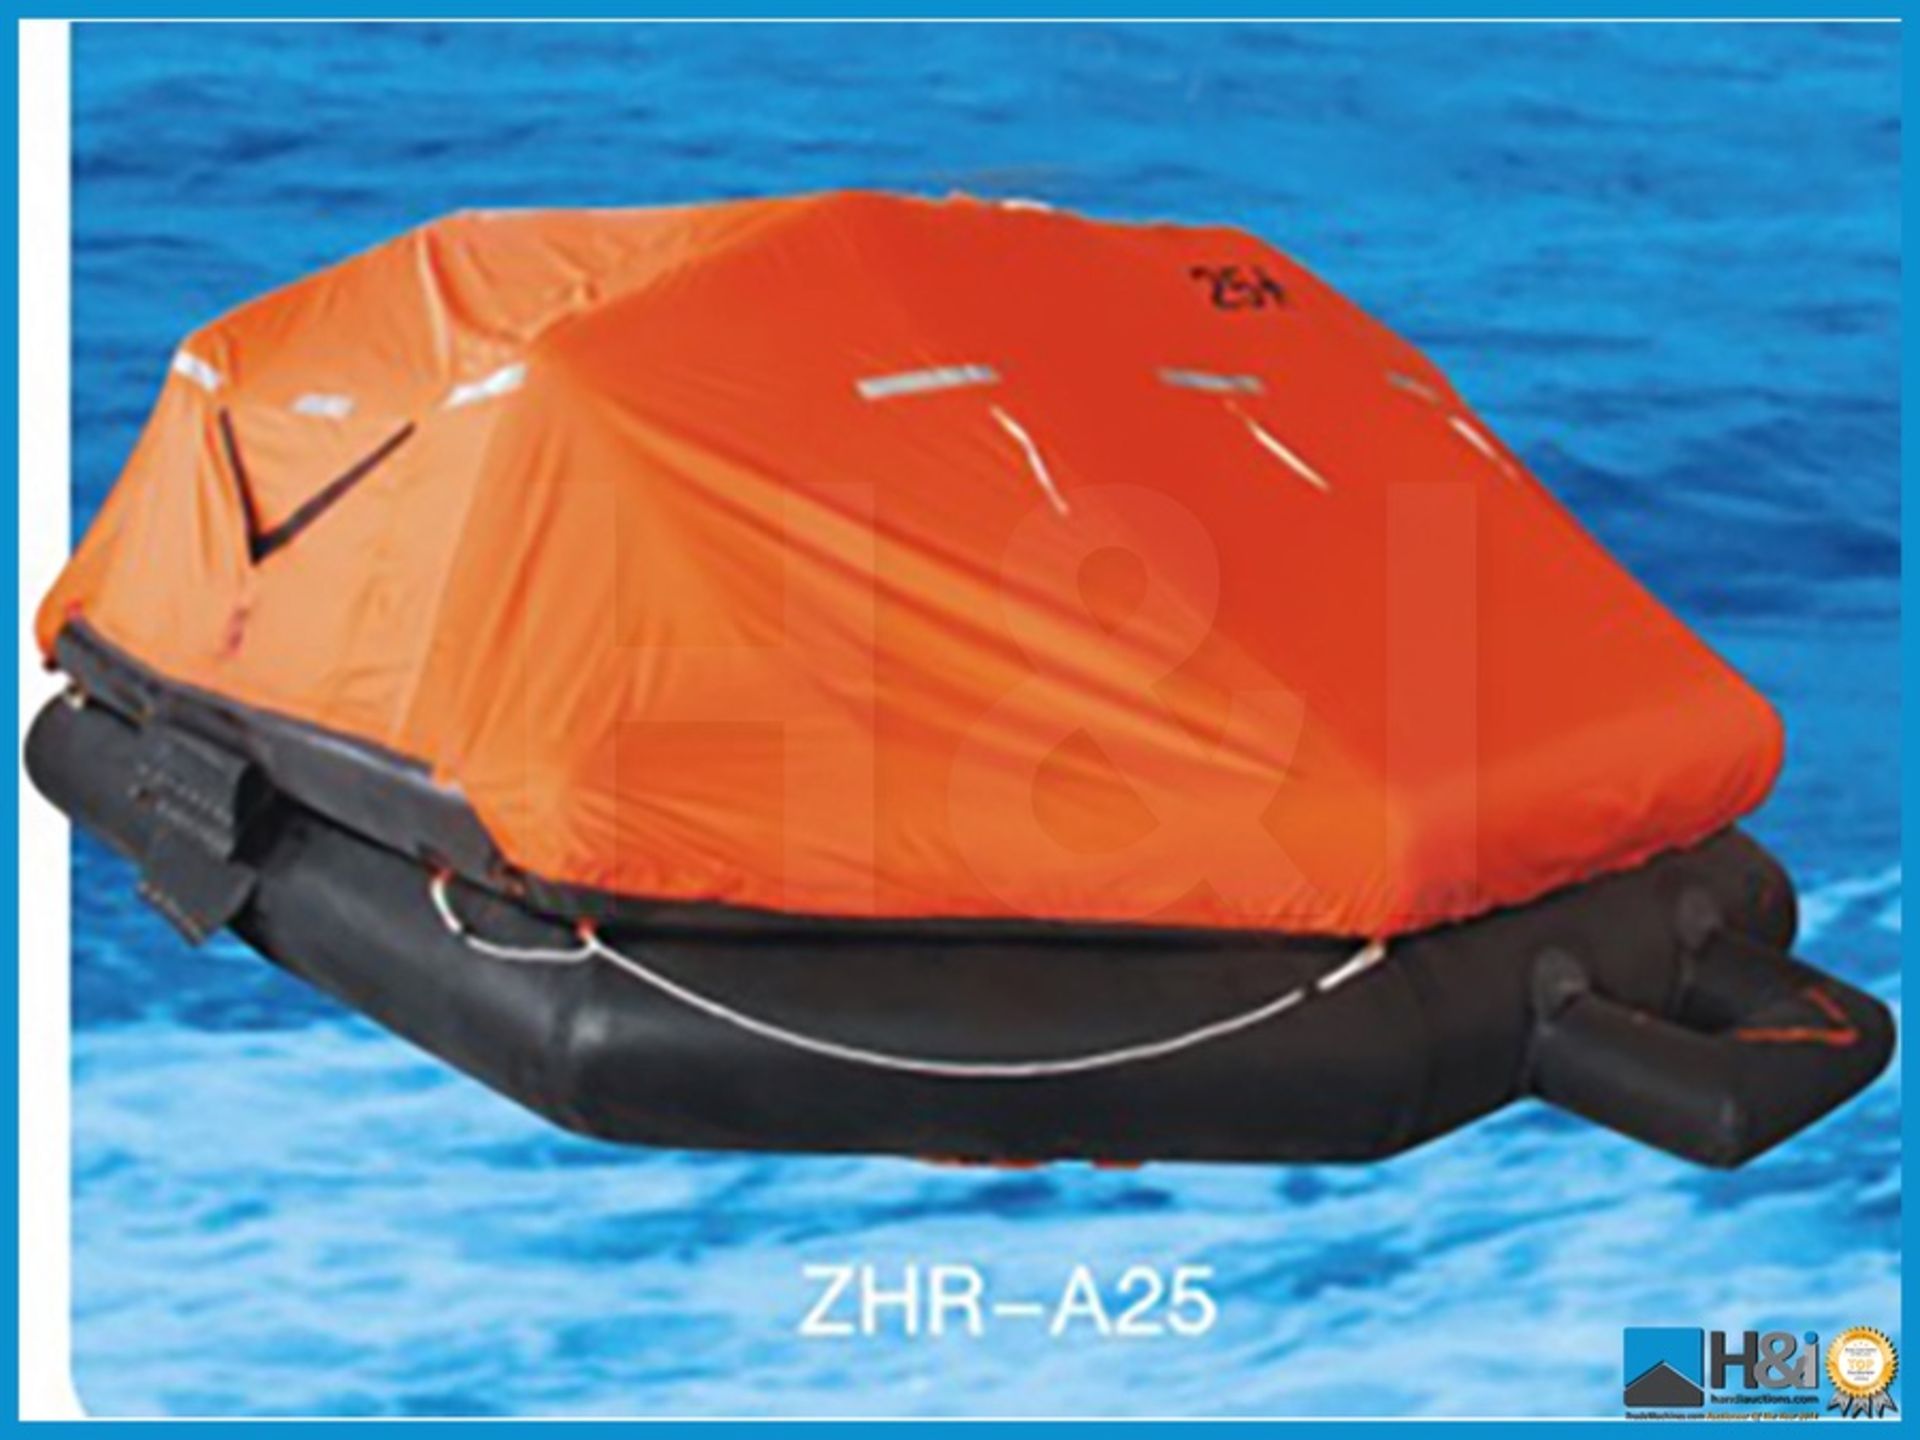 1 off ZHR-A25 25 person capacity throw-over liferaft. Meets the requirements of (Regulations for the